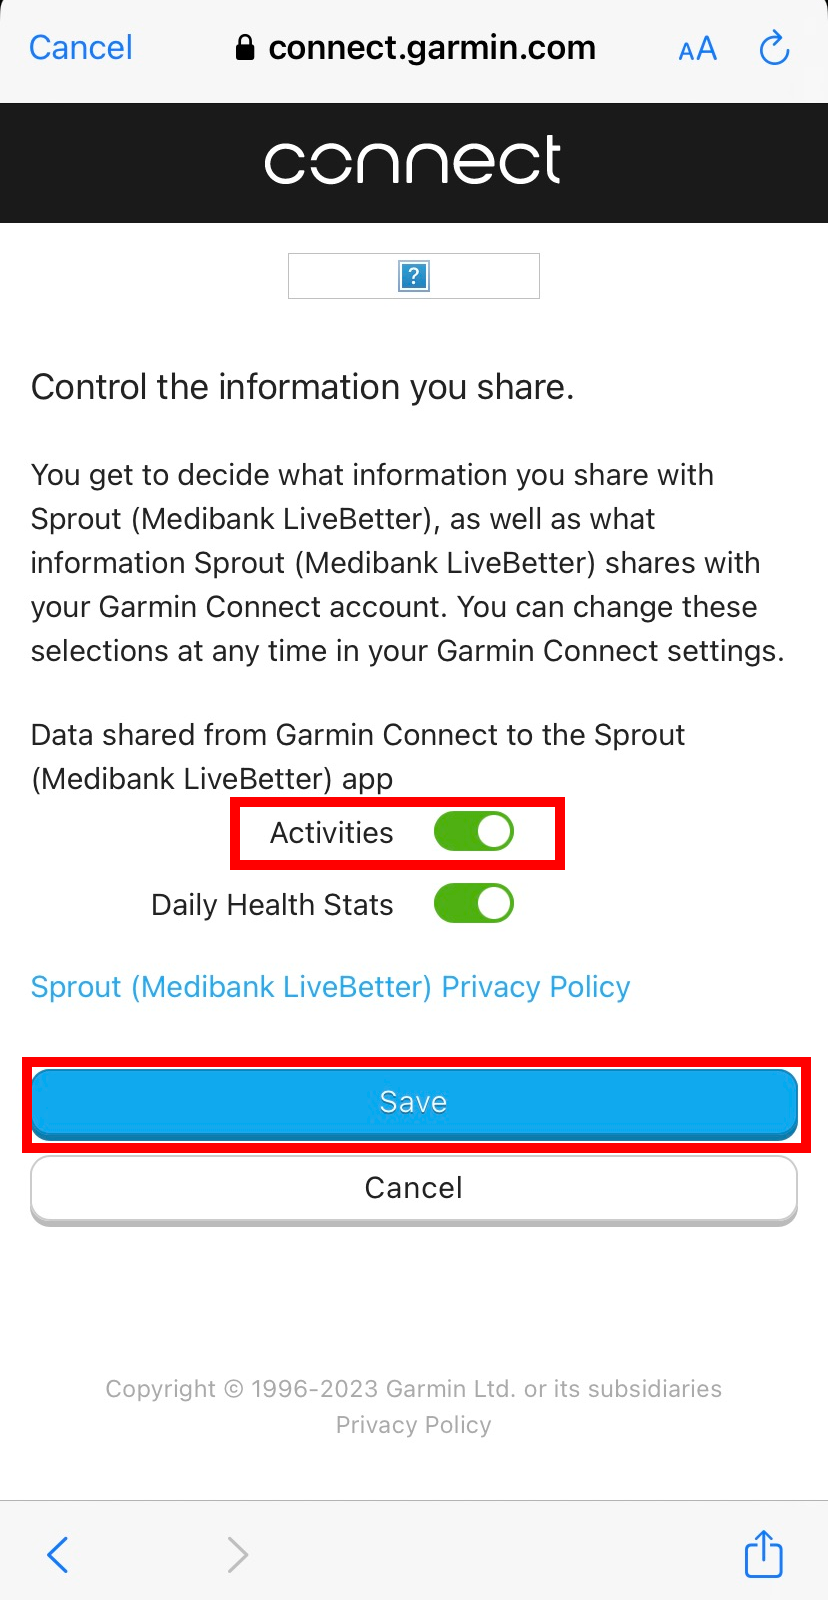 Image showing the activity and daily health status toggle is on through "connect.garmin.com" and the save button has been selected